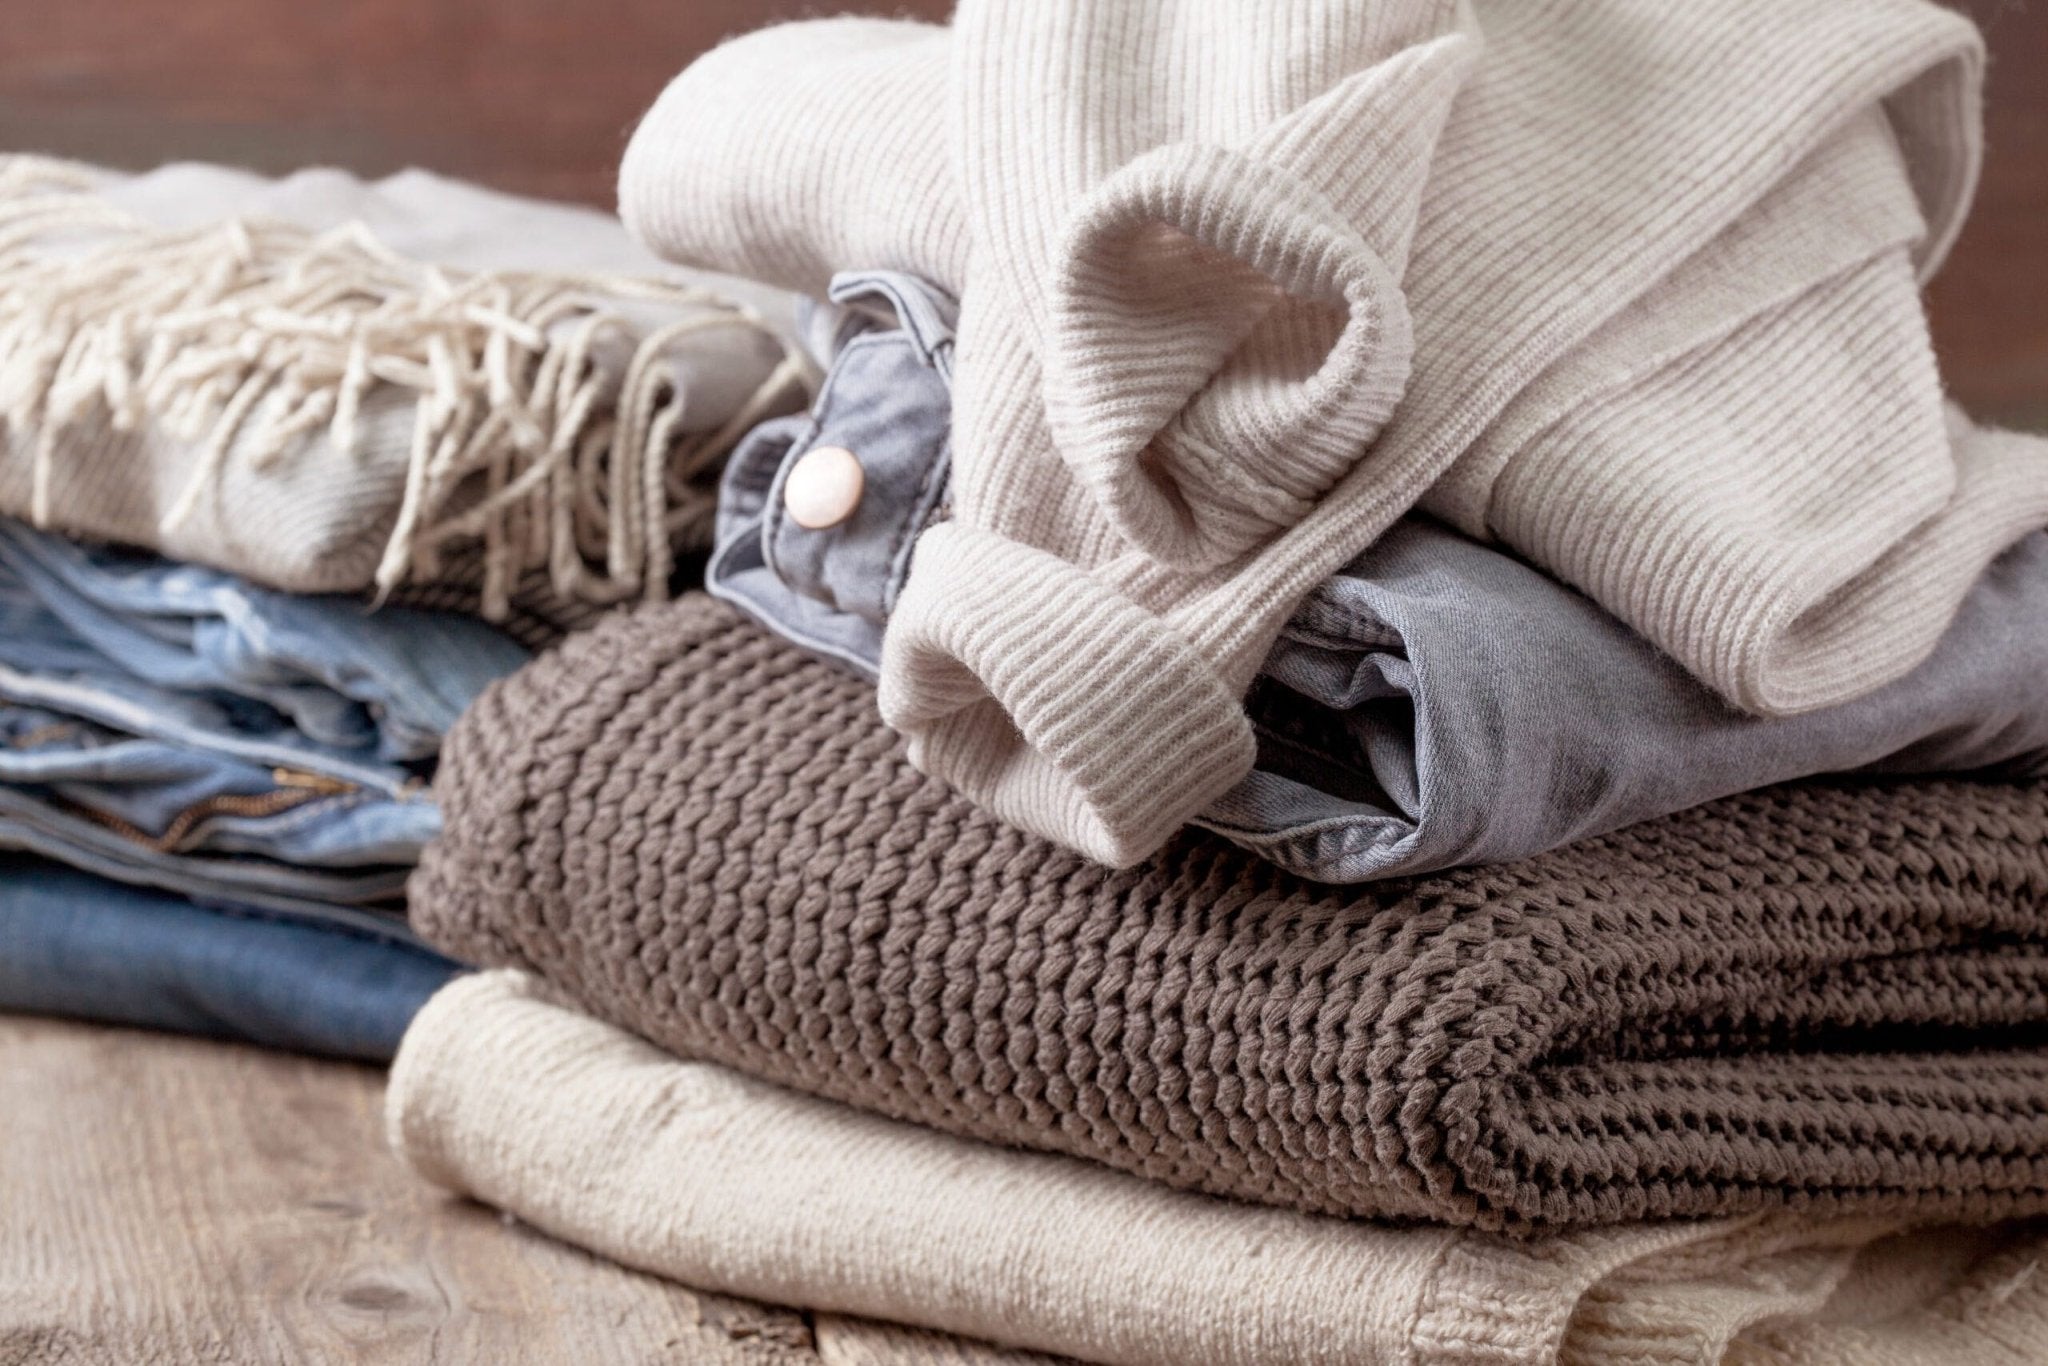 How to store your cashmere to avoid damage and extend the life of your cashmere garments. - Cashmere Circle